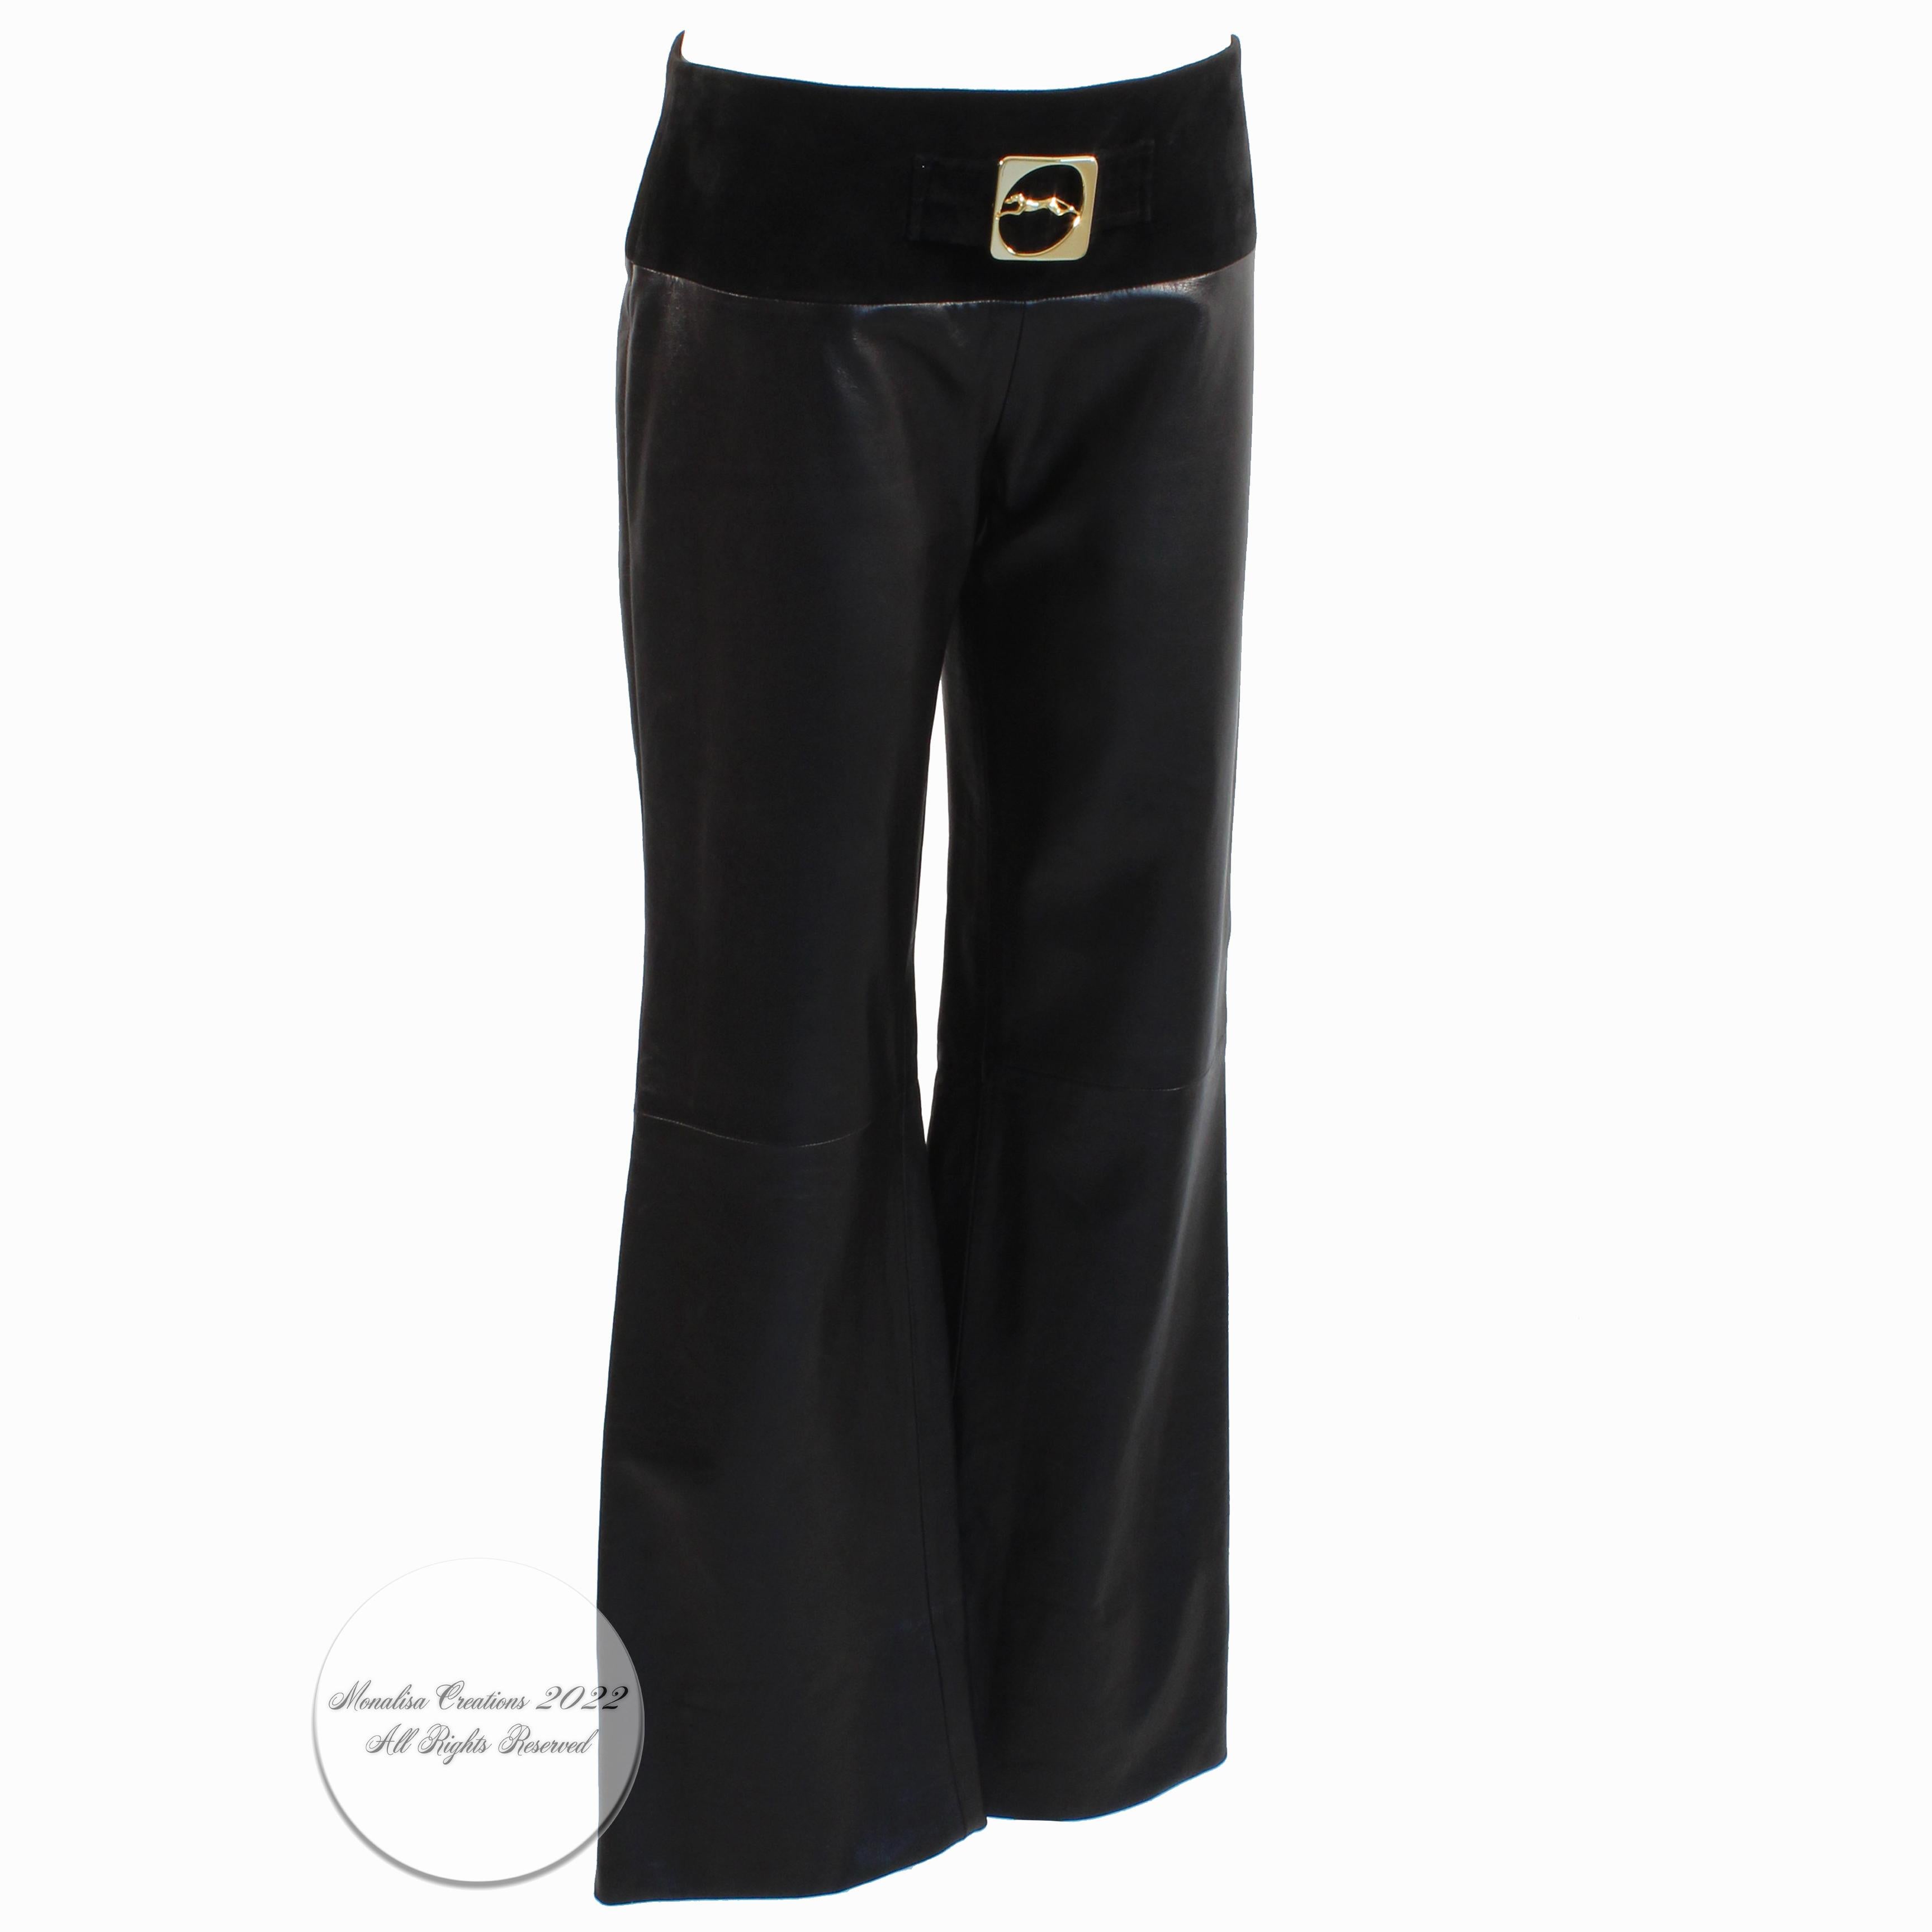 Vintage Trussardi Italy black leather pants with gold logo buckle, most likely made in the late 90s, early 2000s. Made from supple black leather, the waist area is made from black suede and features a decorative gold logo buckle and cinch strap.